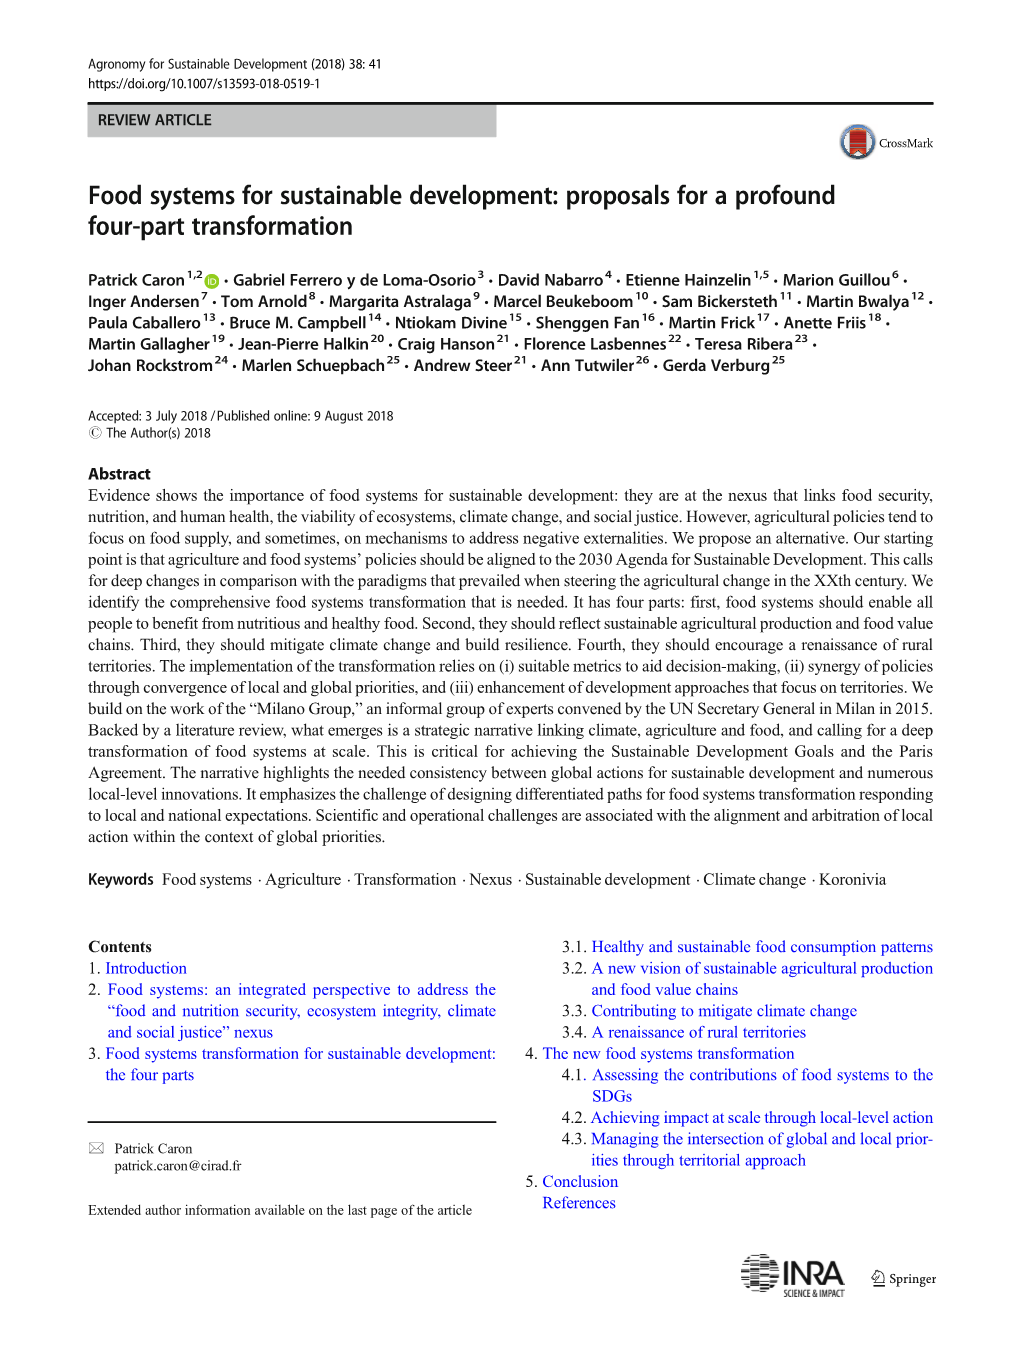 Food Systems for Sustainable Development: Proposals for a Profound Four-Part Transformation